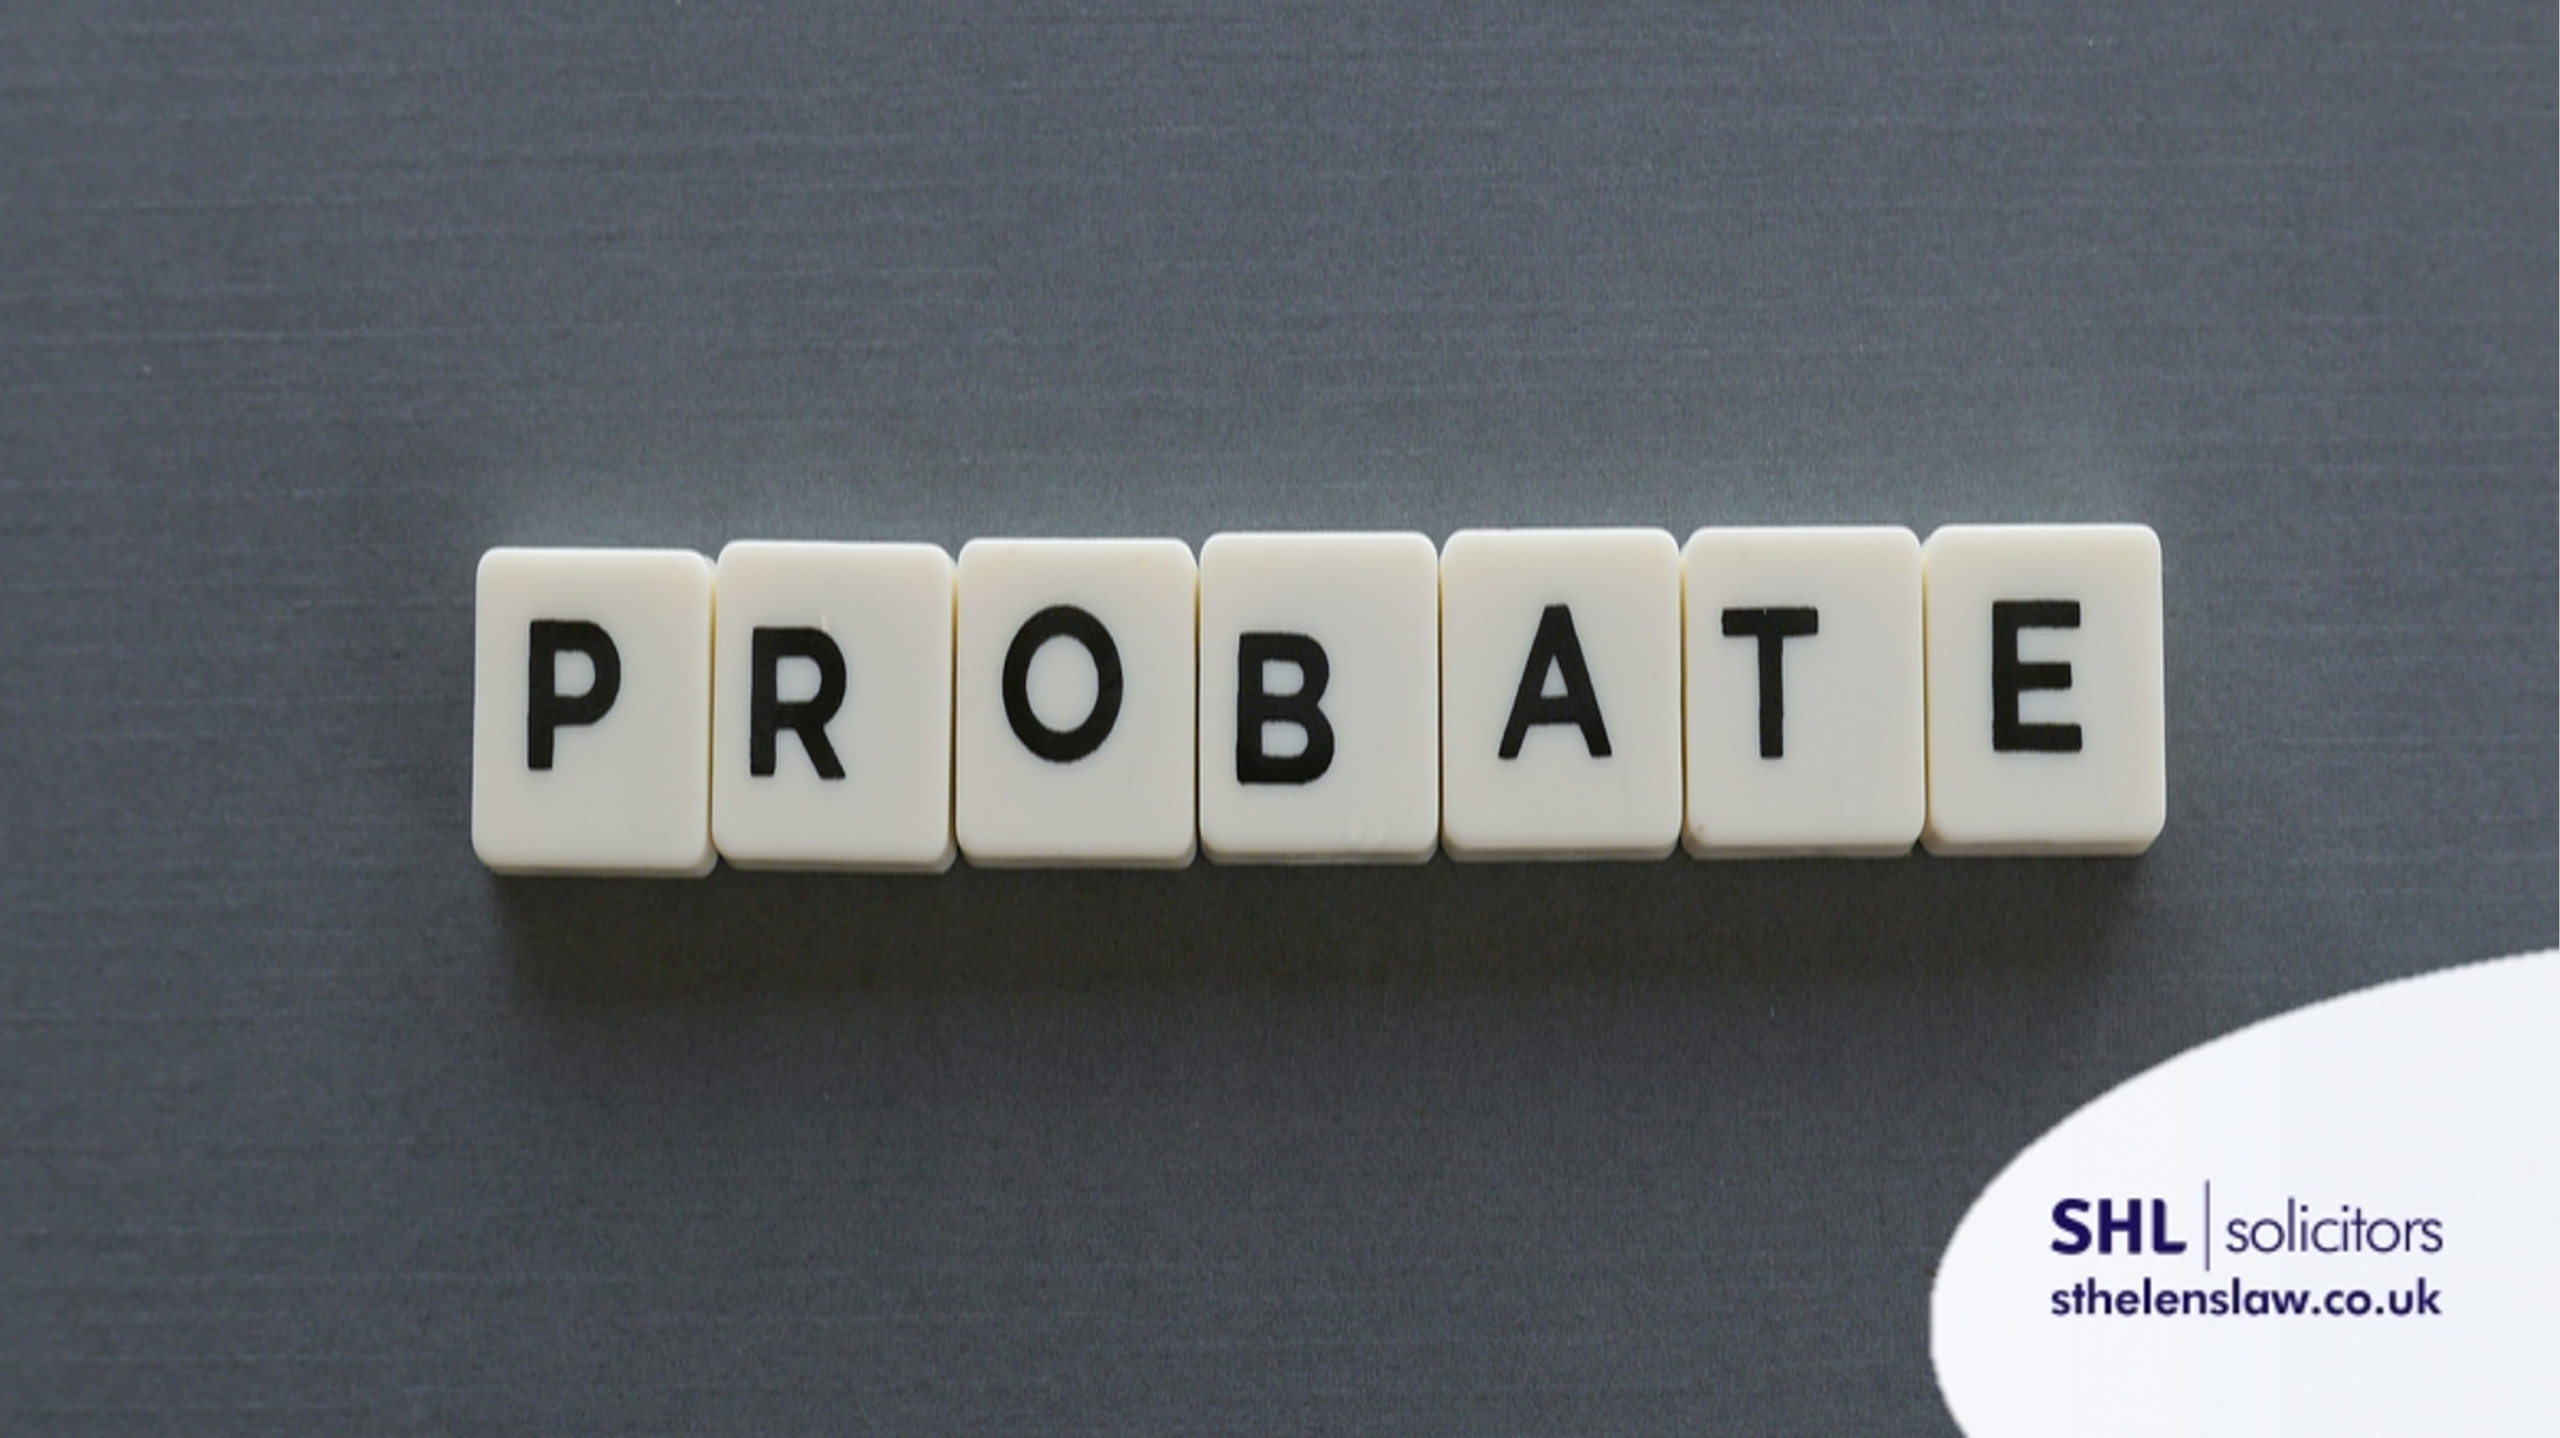 Why is probate so important